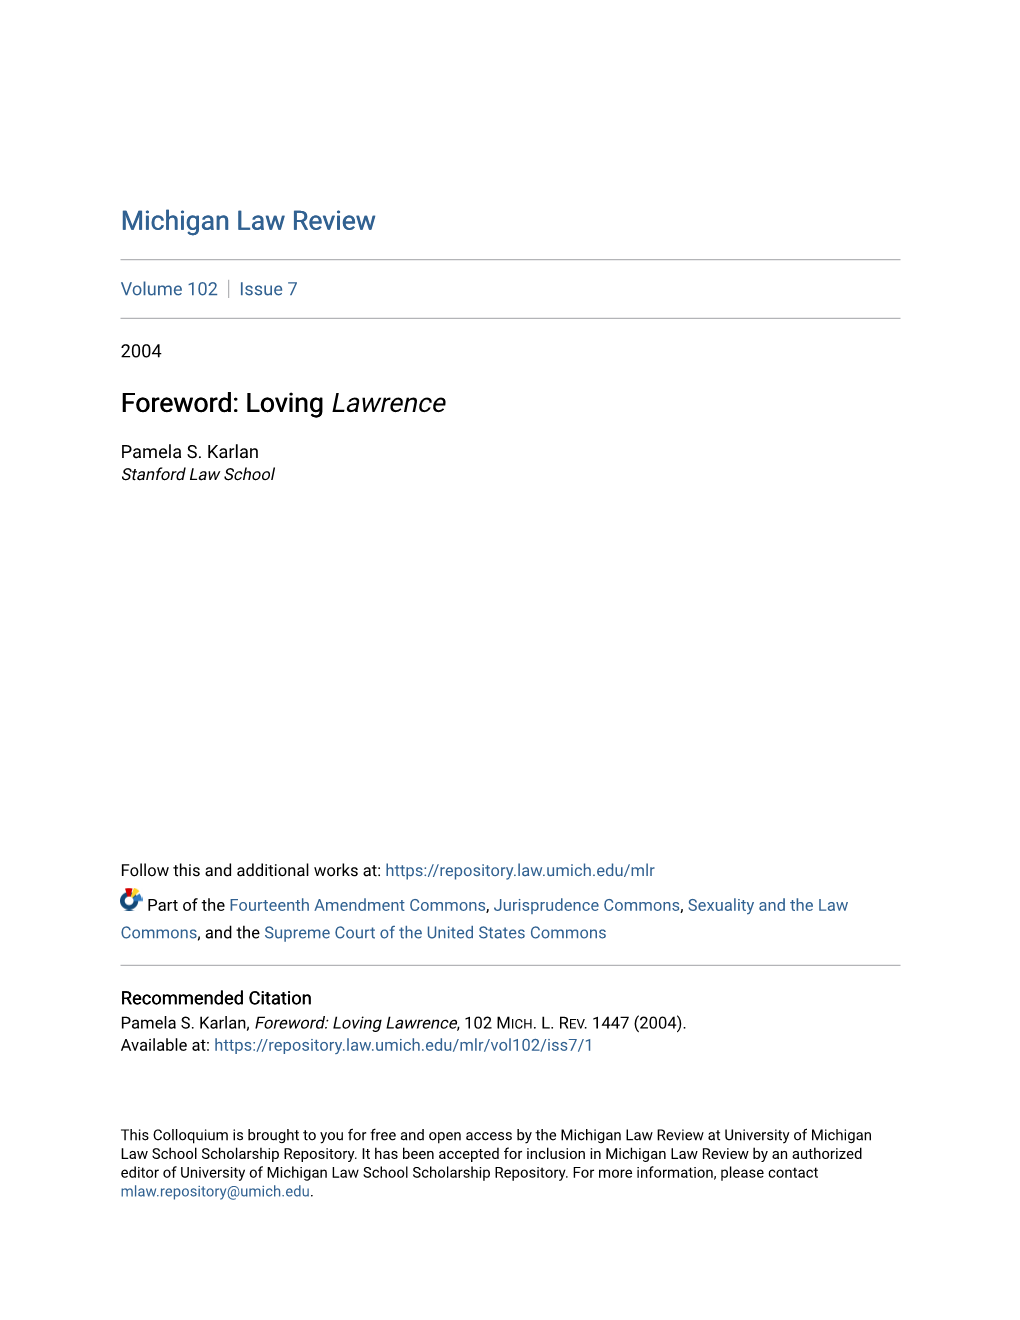 Foreword: Loving Lawrence